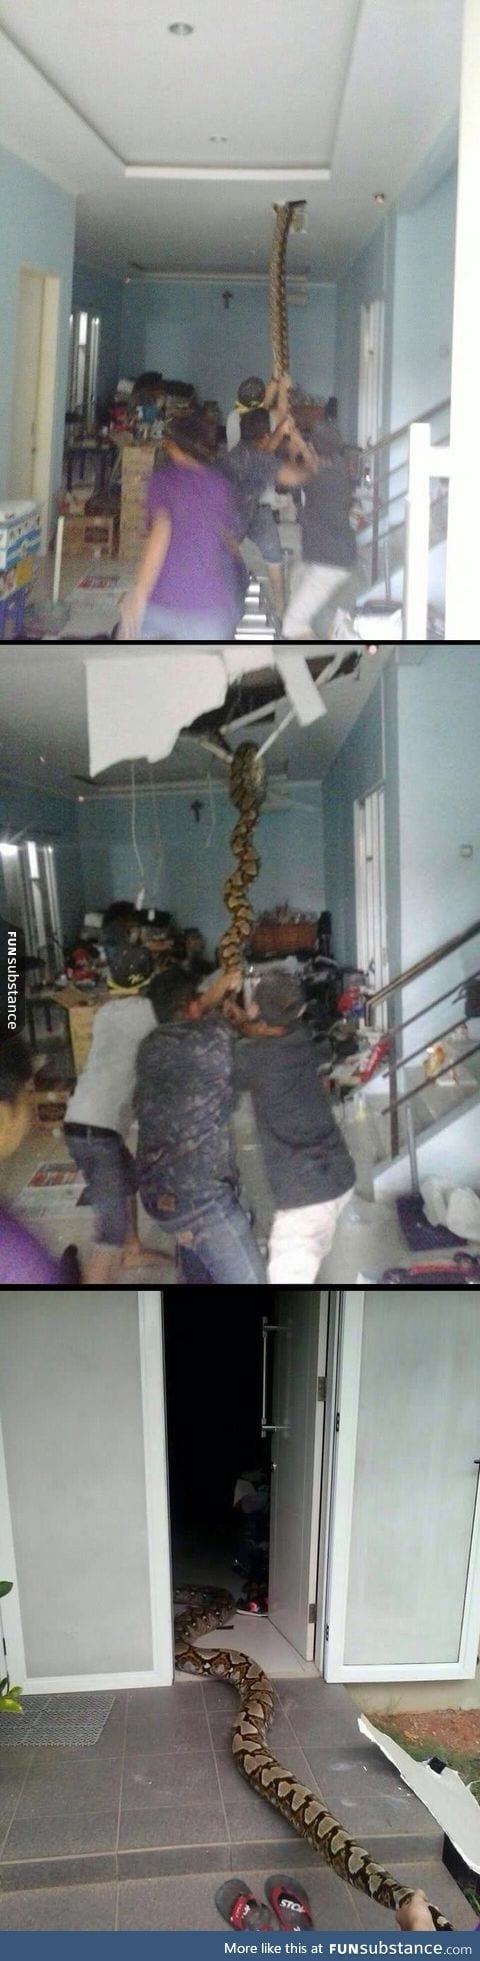 Snake pulled from the ceiling